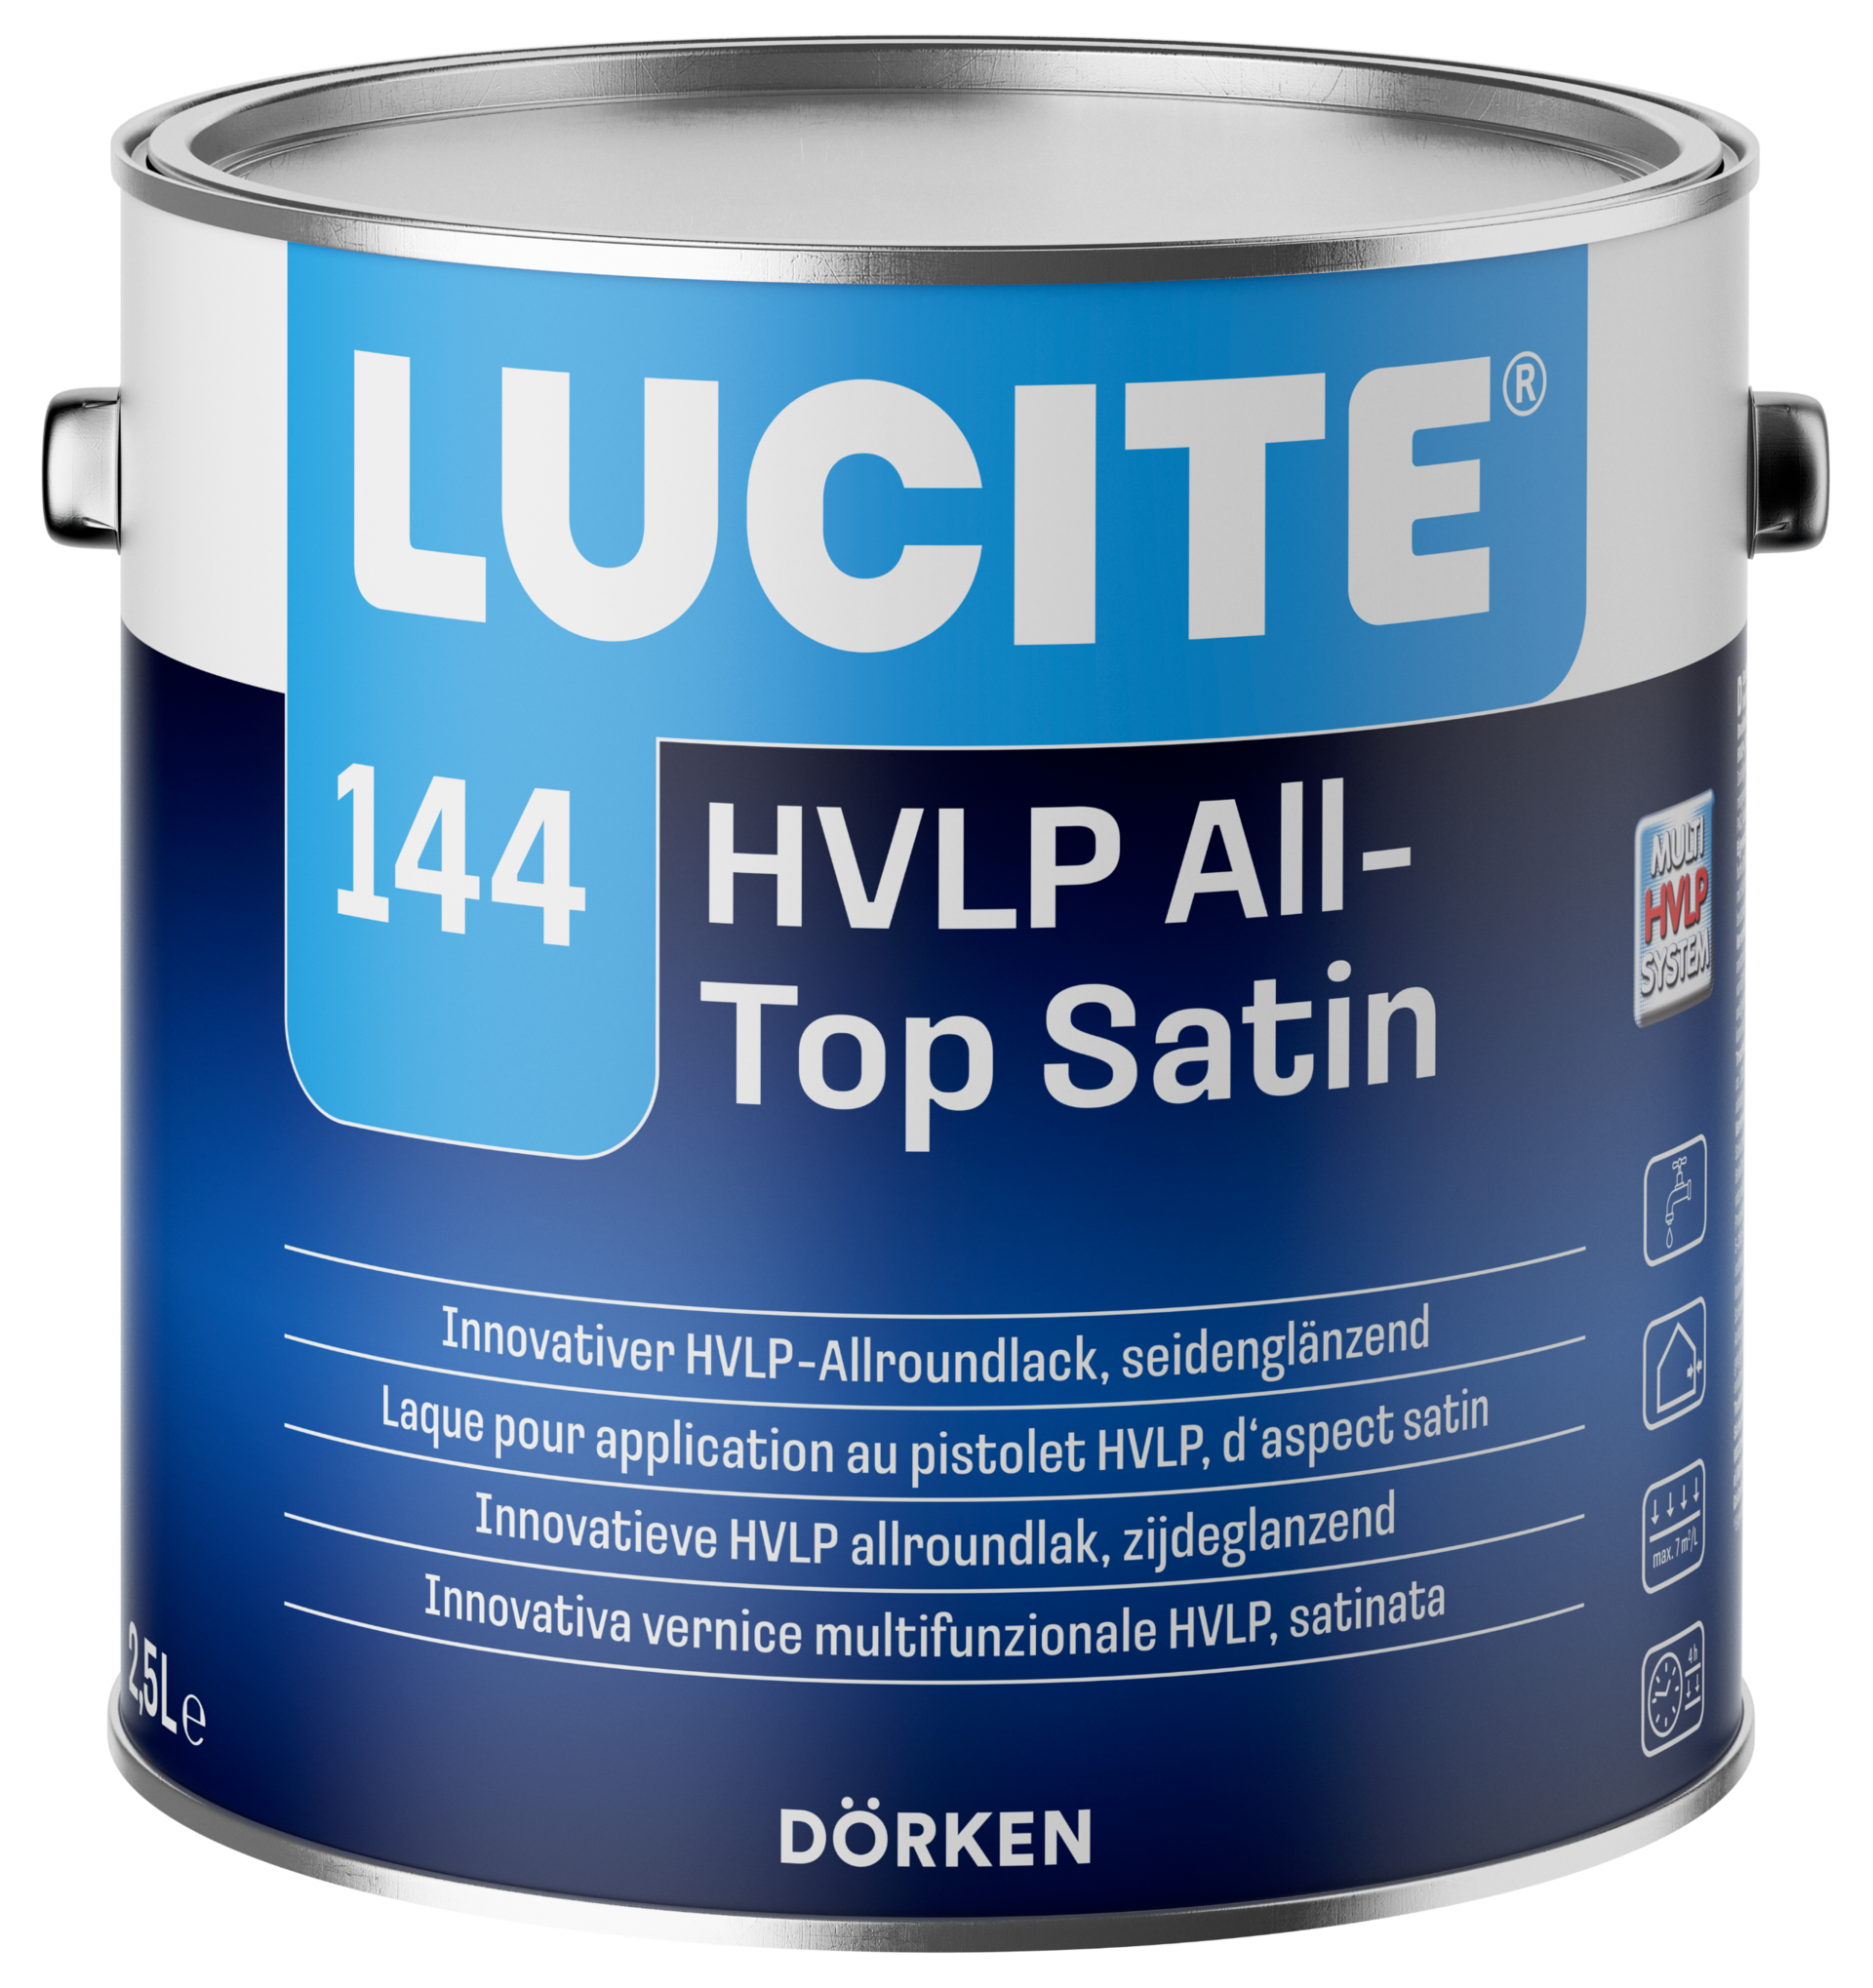 LUCITE® 144 All-Top Satin